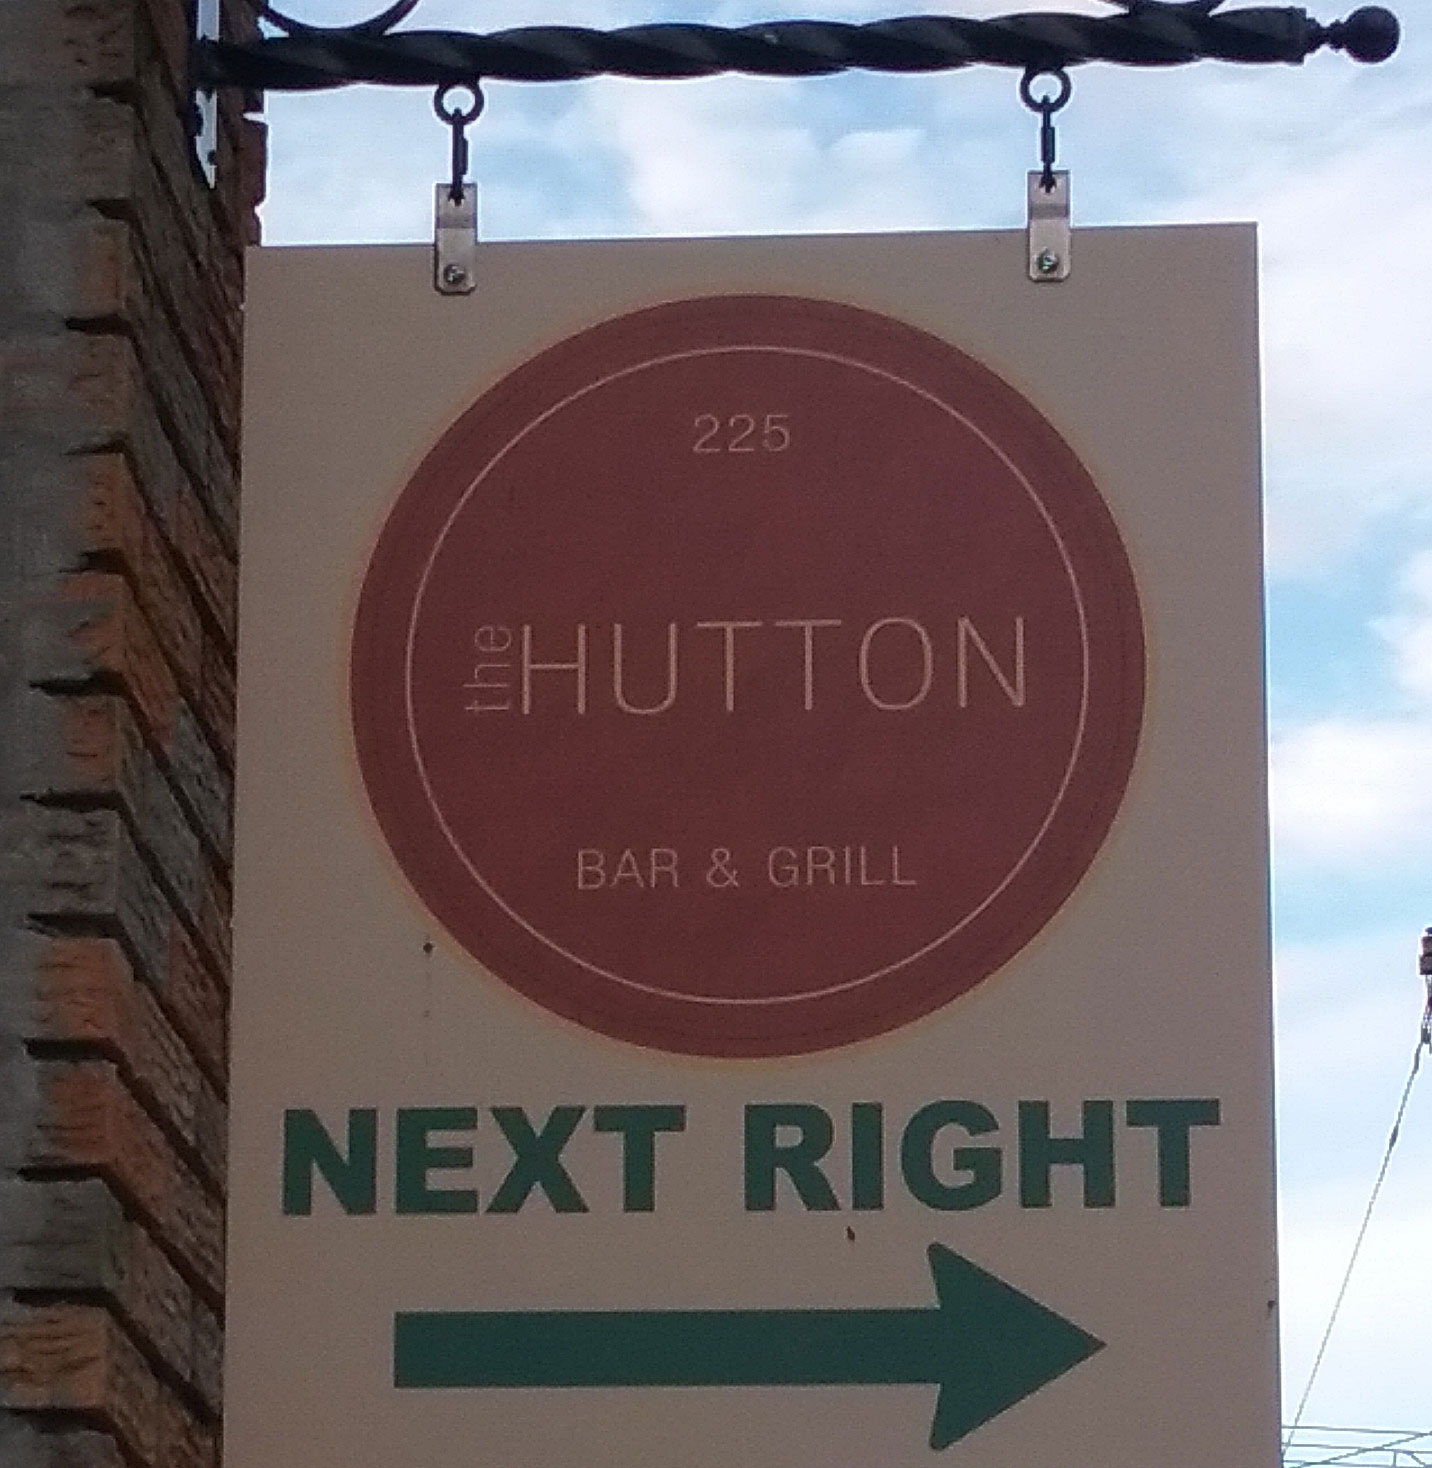 Sign for the Hutton that says "next right"